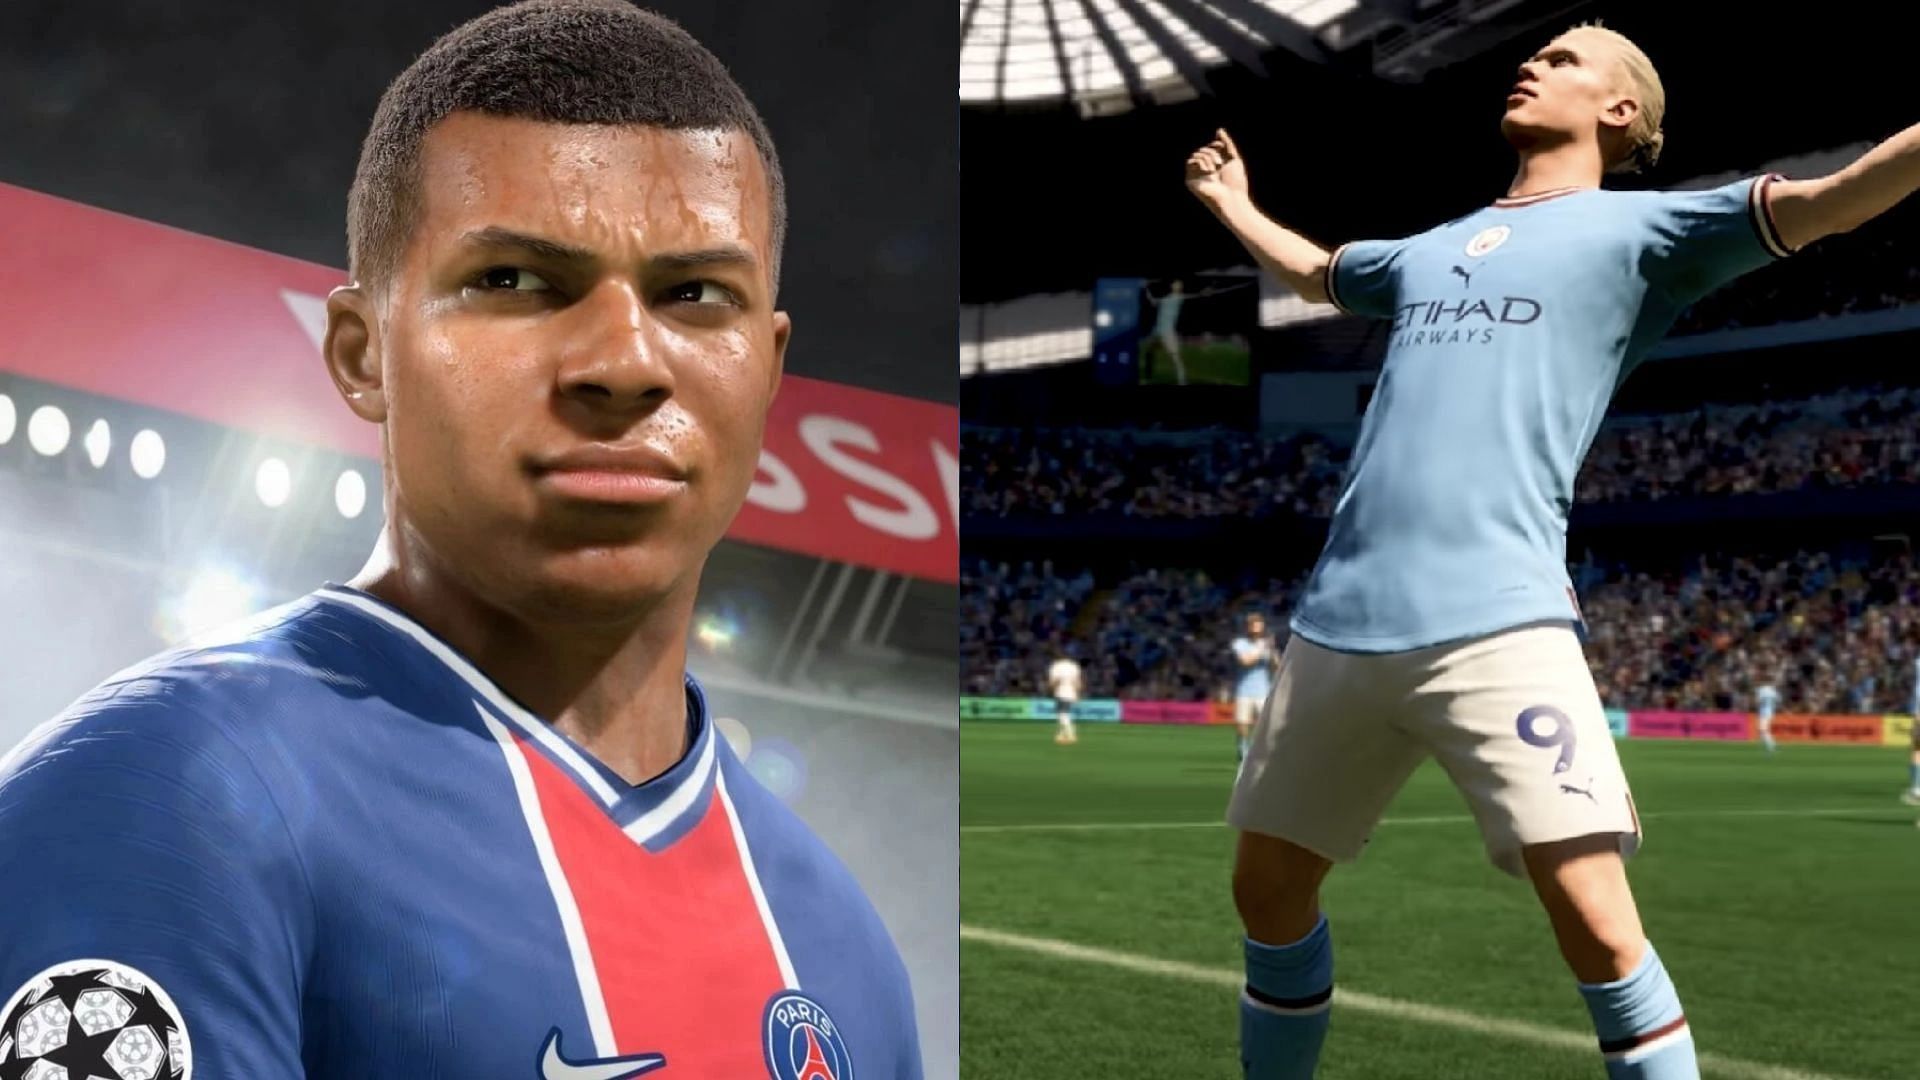 FIFA 23: Players with best potential on Career Mode